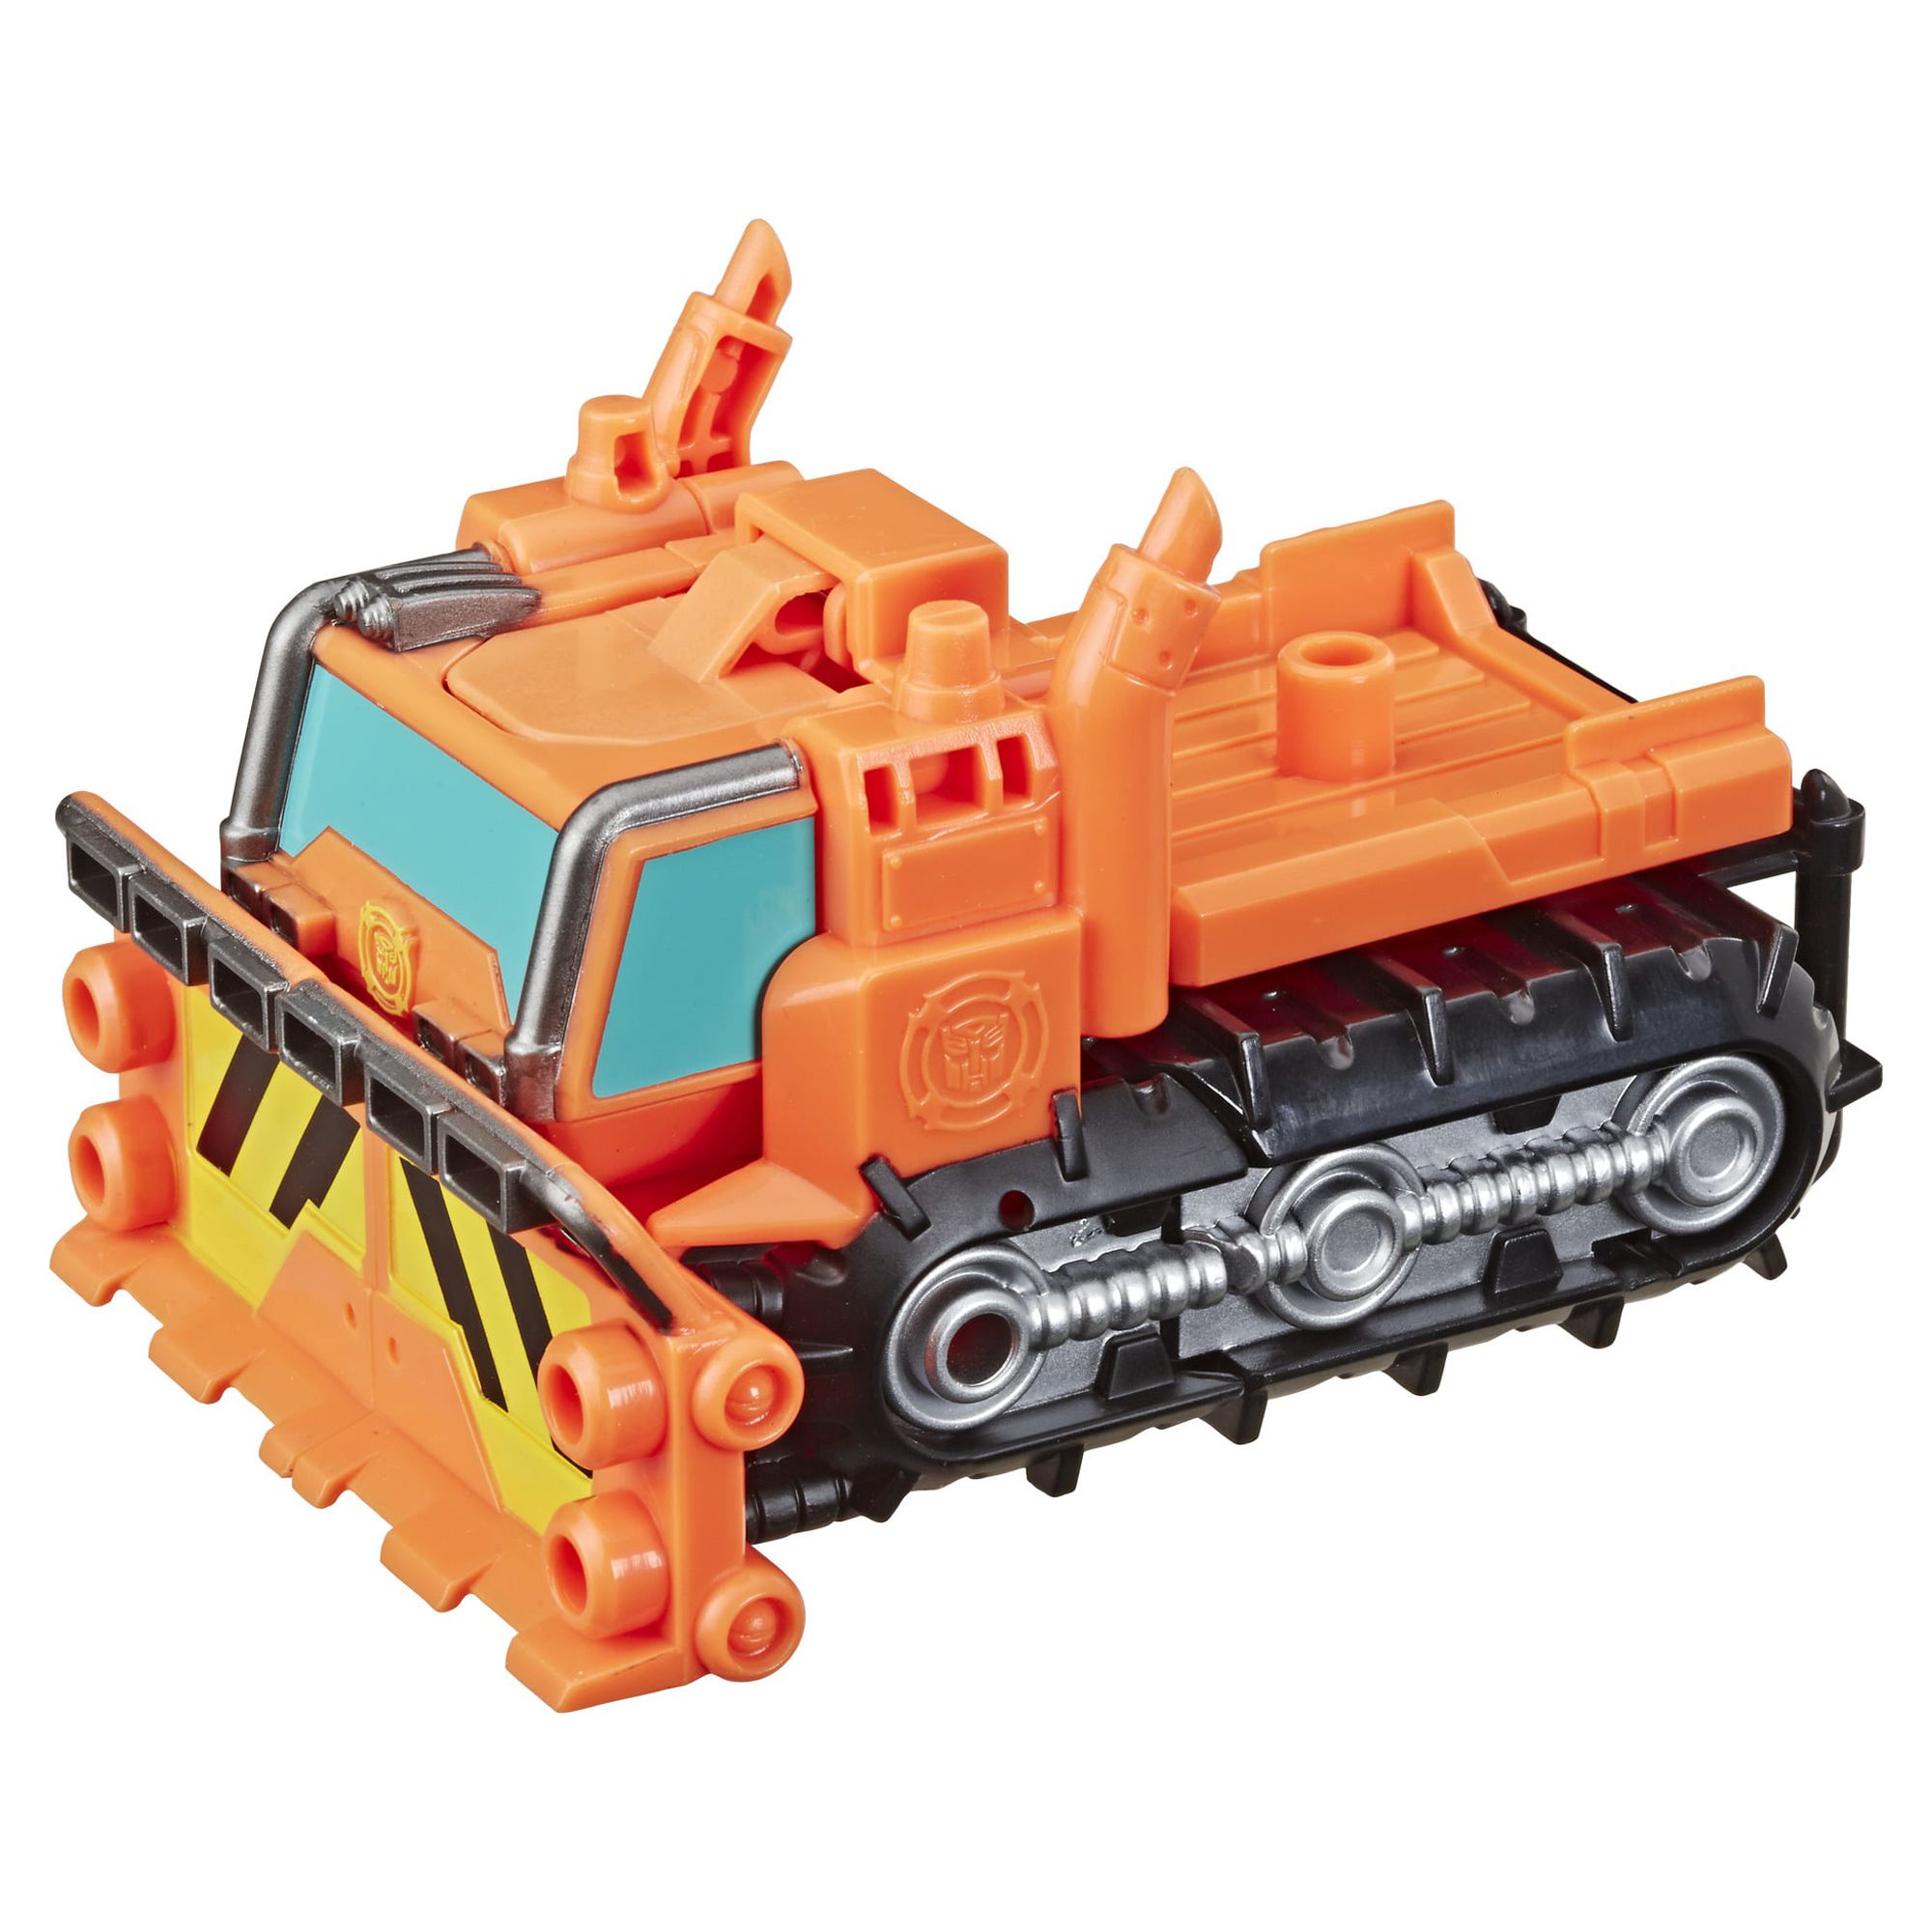 Playskool Transformers Rescue Bots Academy Wedge the Construction-Bot Action Figure - image 2 of 8